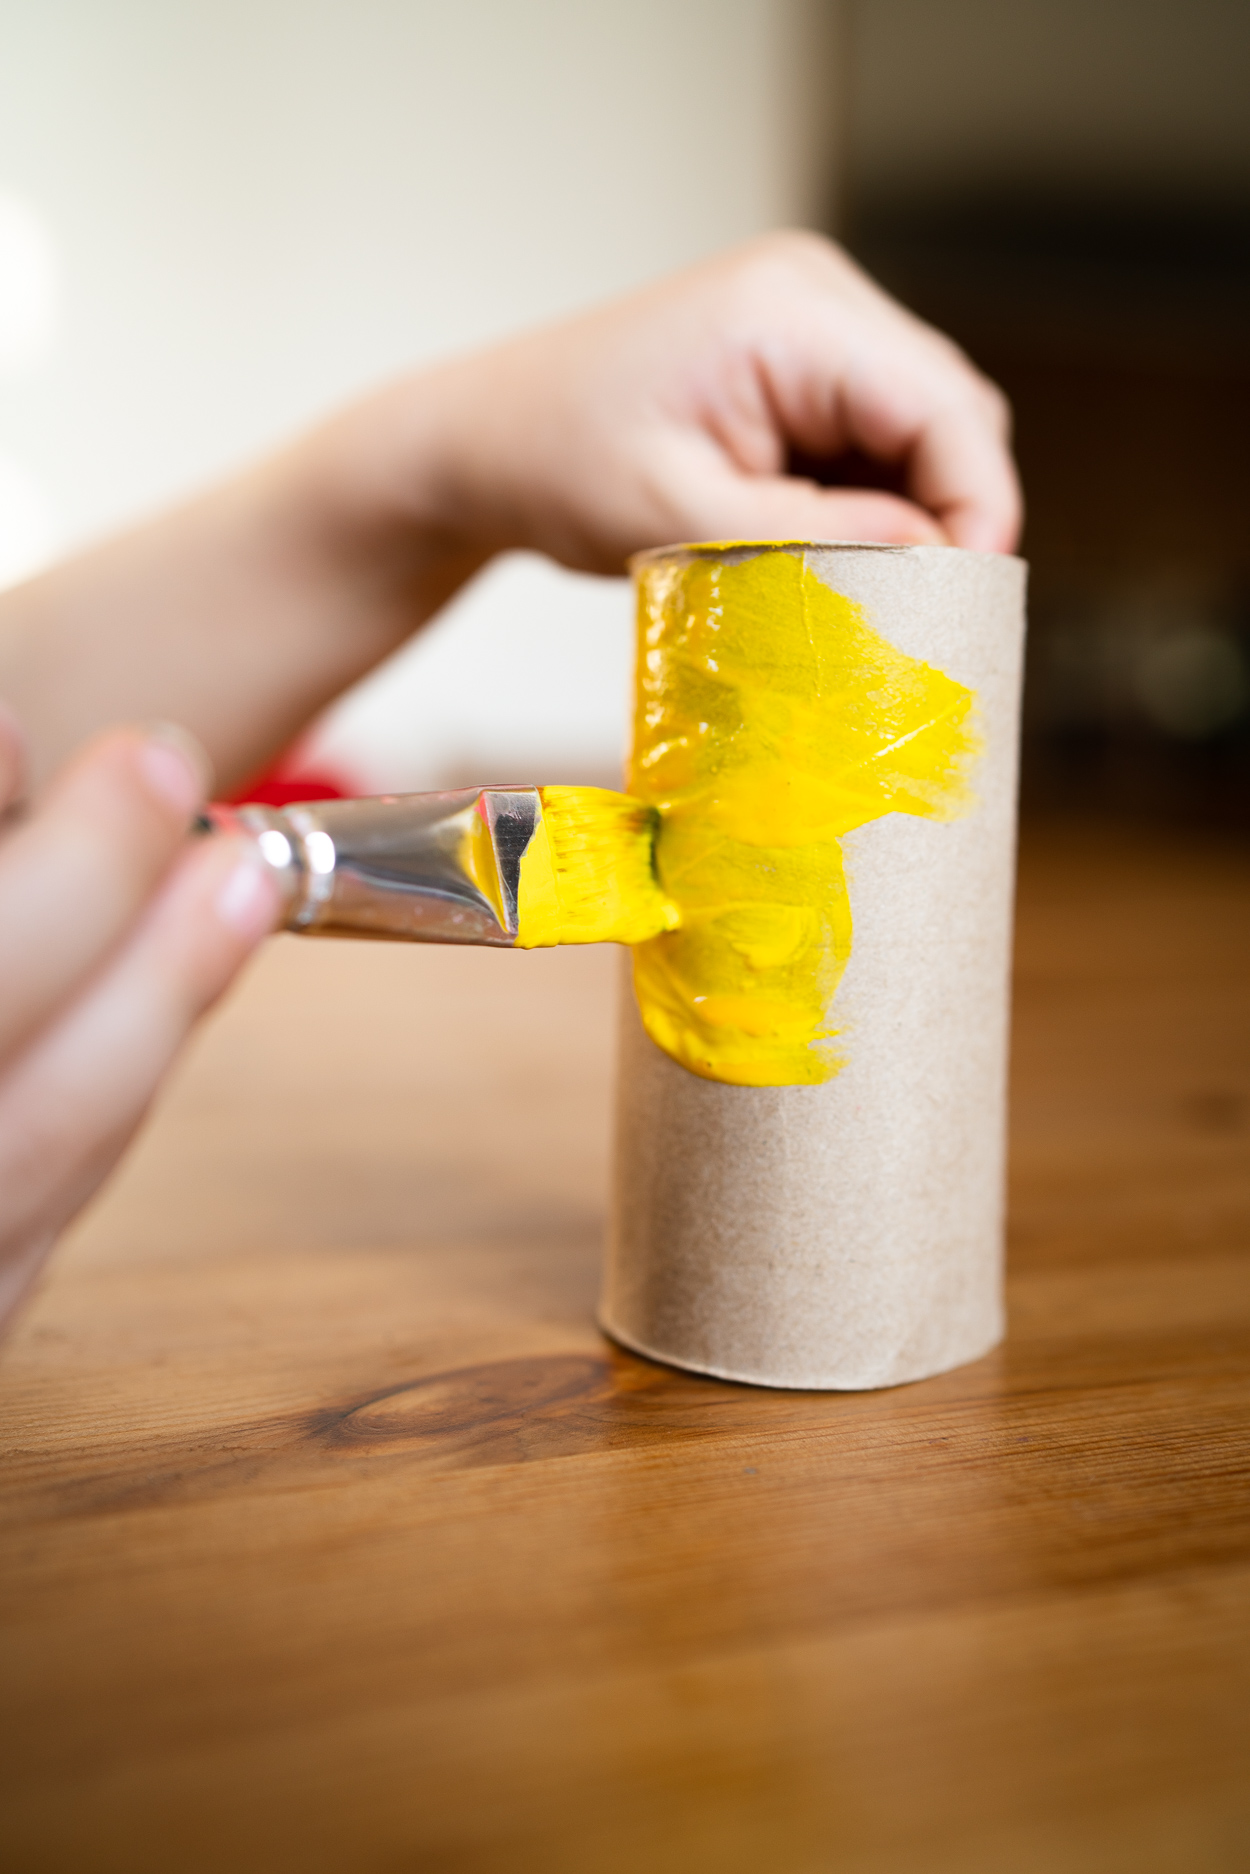 Take a toilet paper roll and paint it yellow